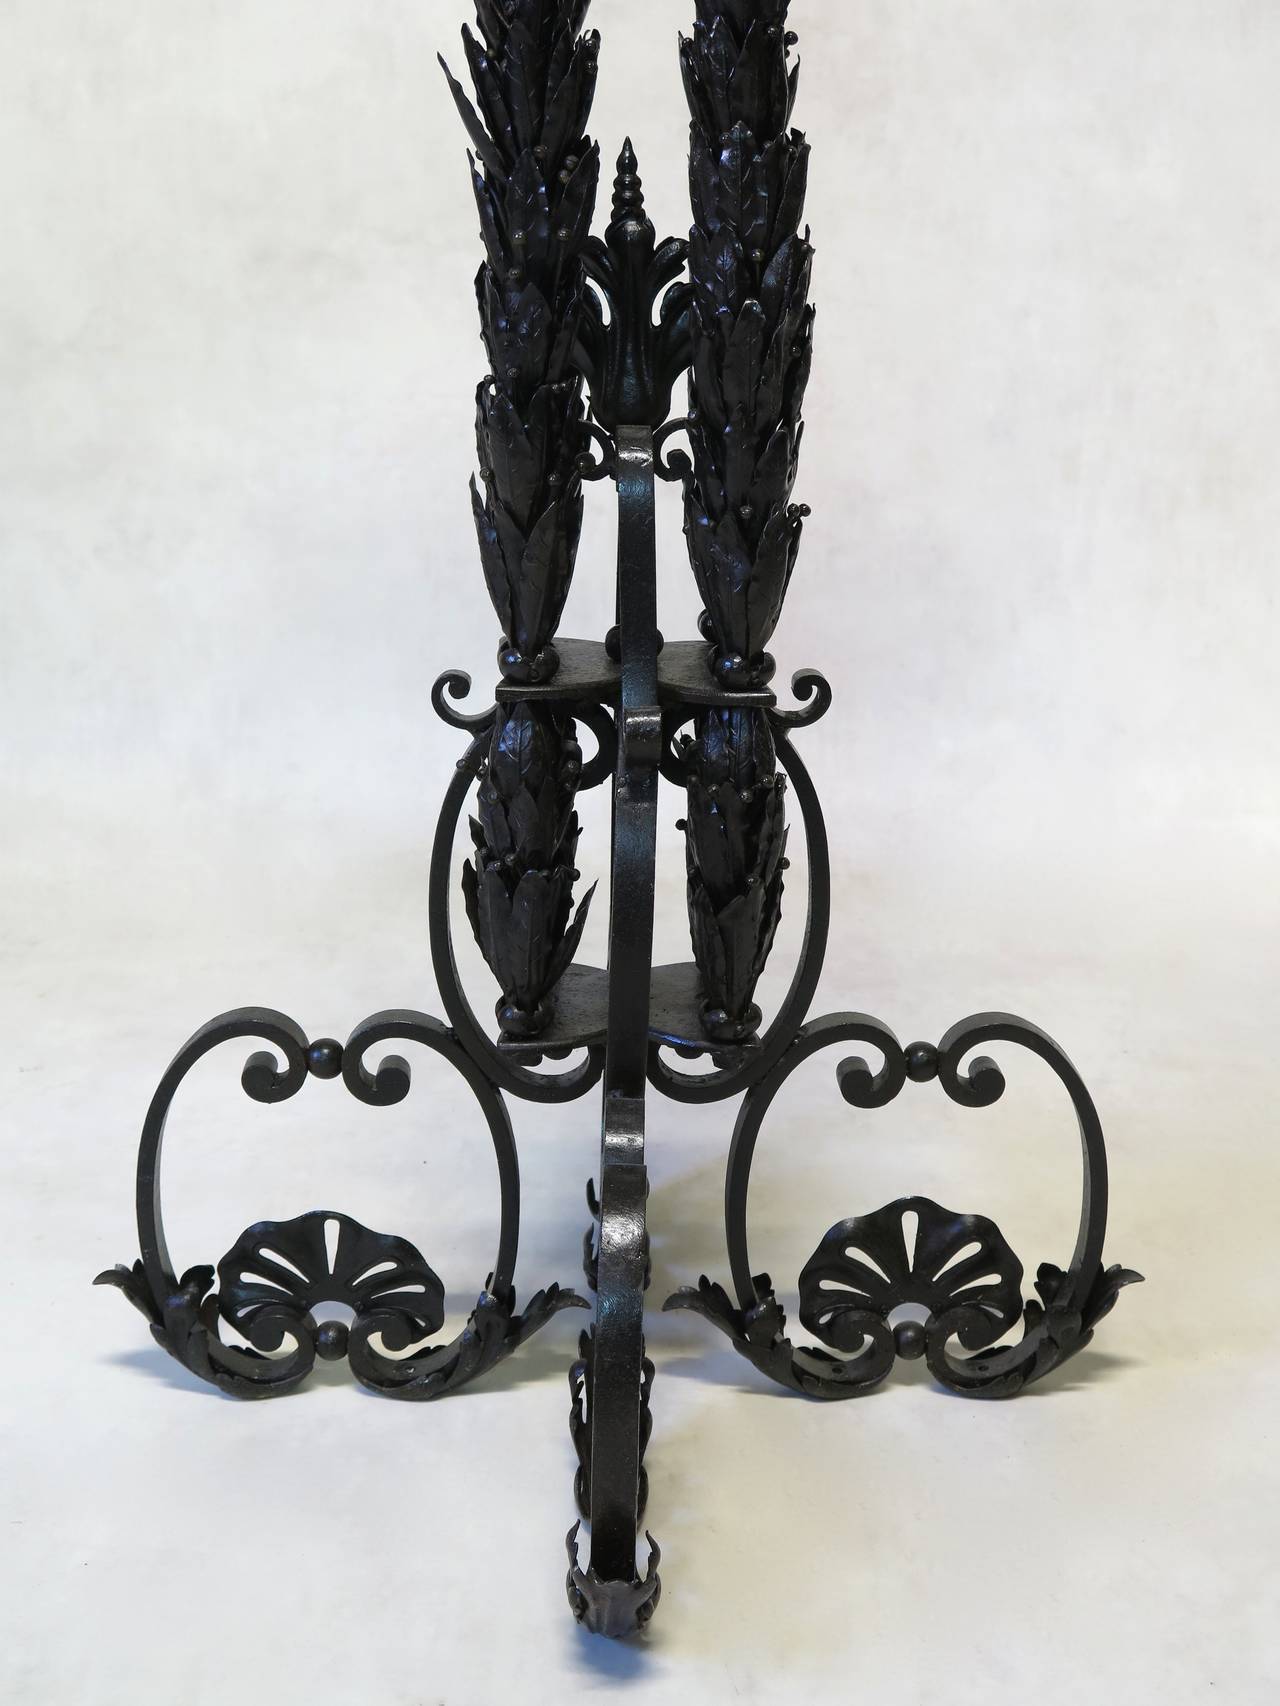 Intricate Wrought-Iron Laurel Wreath Floor Lamp, France 1940s In Excellent Condition For Sale In Isle Sur La Sorgue, Vaucluse